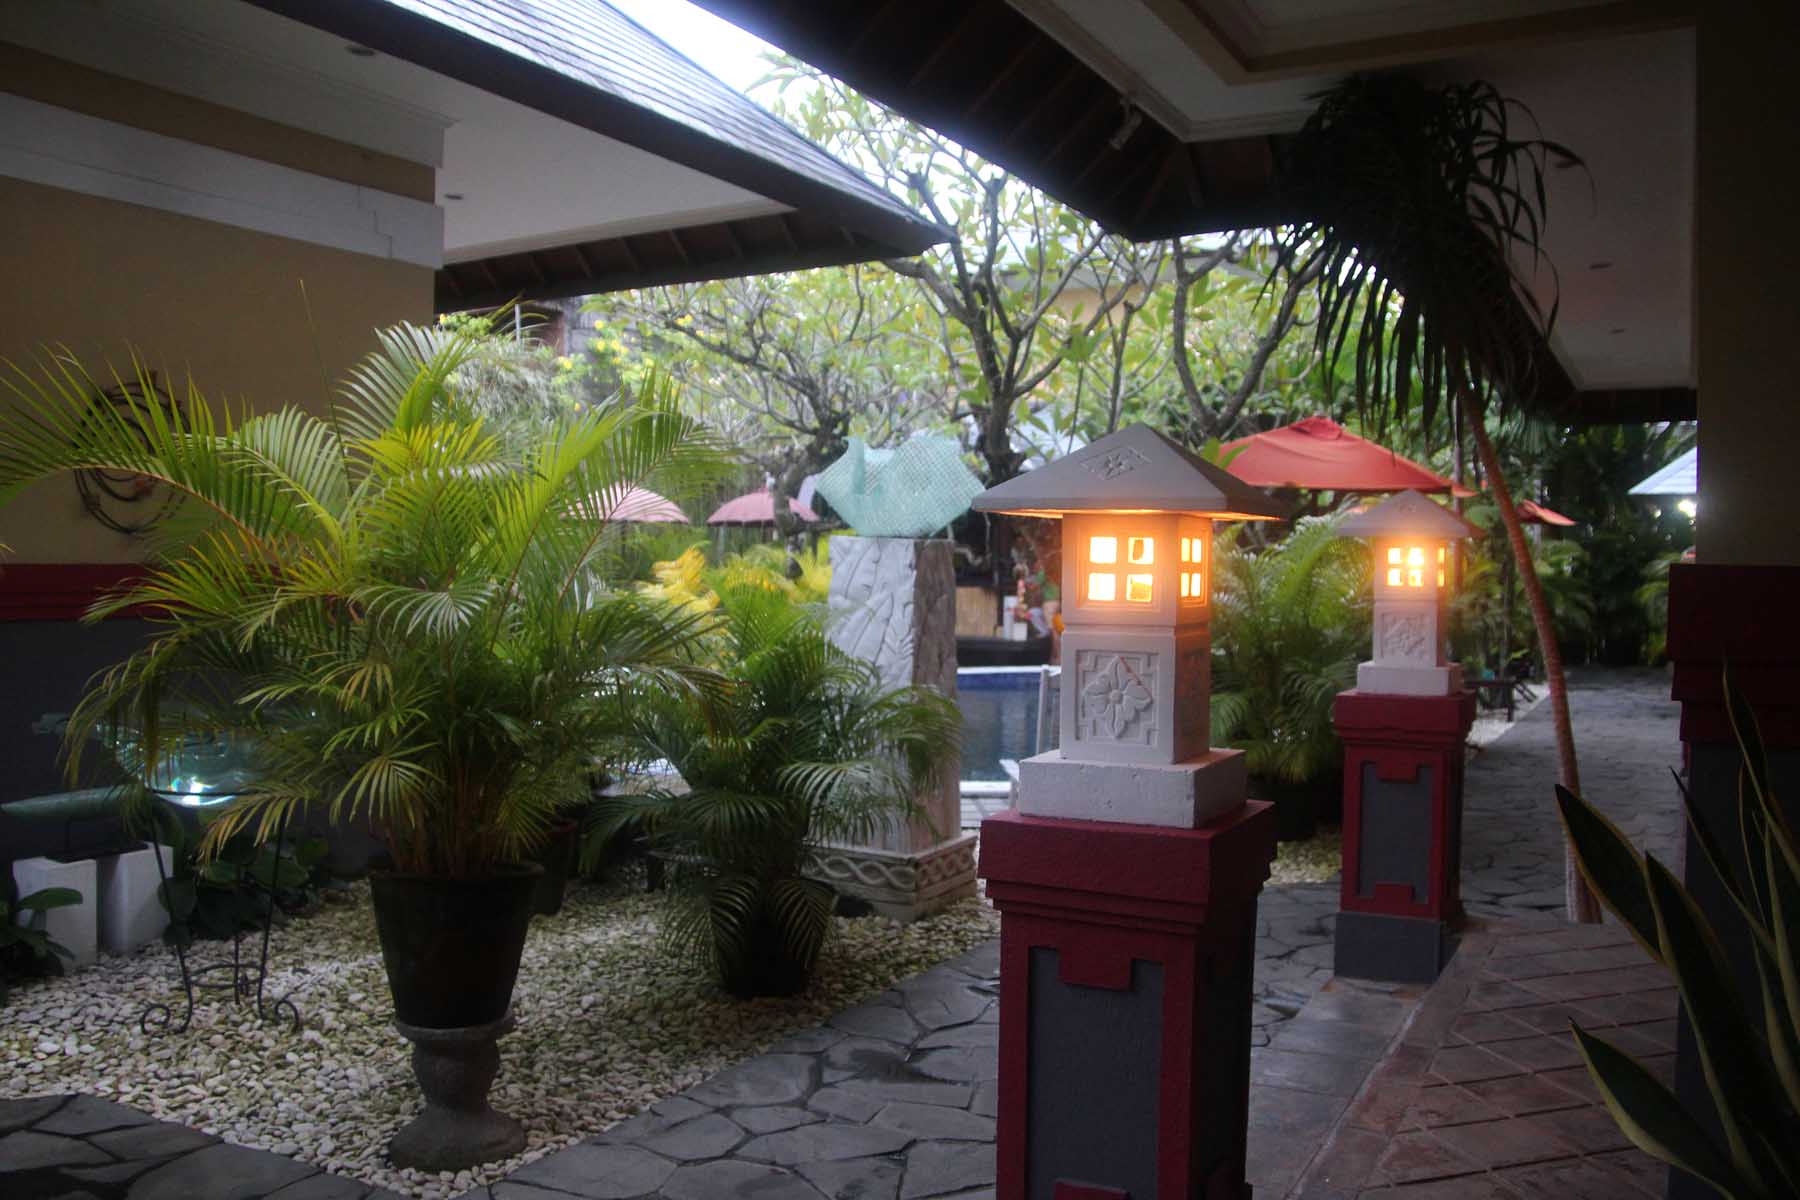 Dusk at the guesthouse with lanterns glowing.